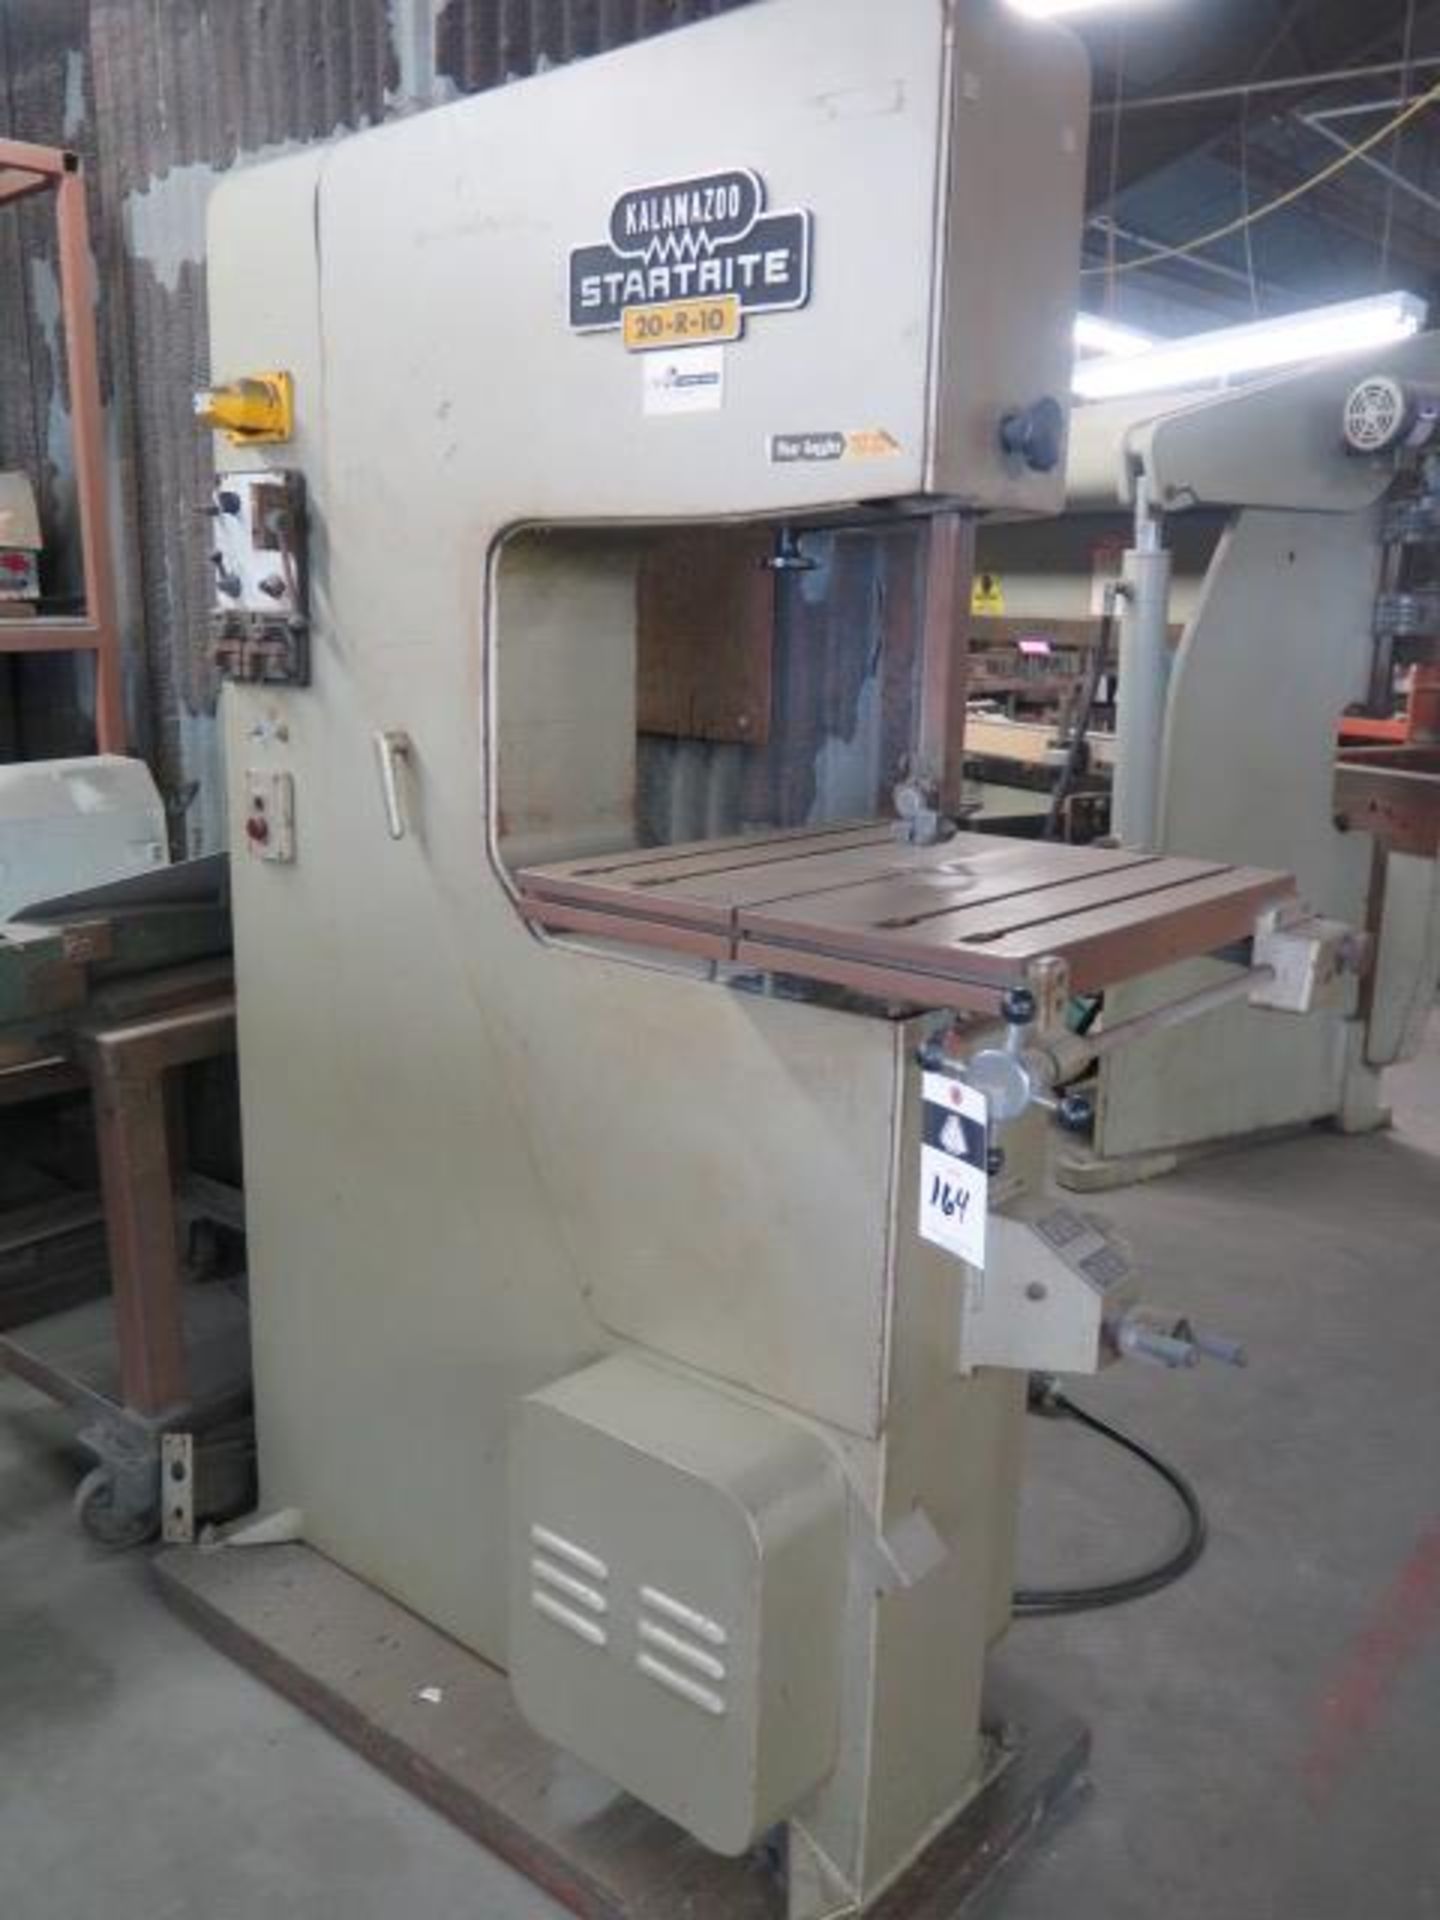 Kalamazoo Startrite 20-R-10 20" Vertical Band Saw w/ Blade Welder (SOLD AS-IS - NO WARRANTY) - Image 2 of 9